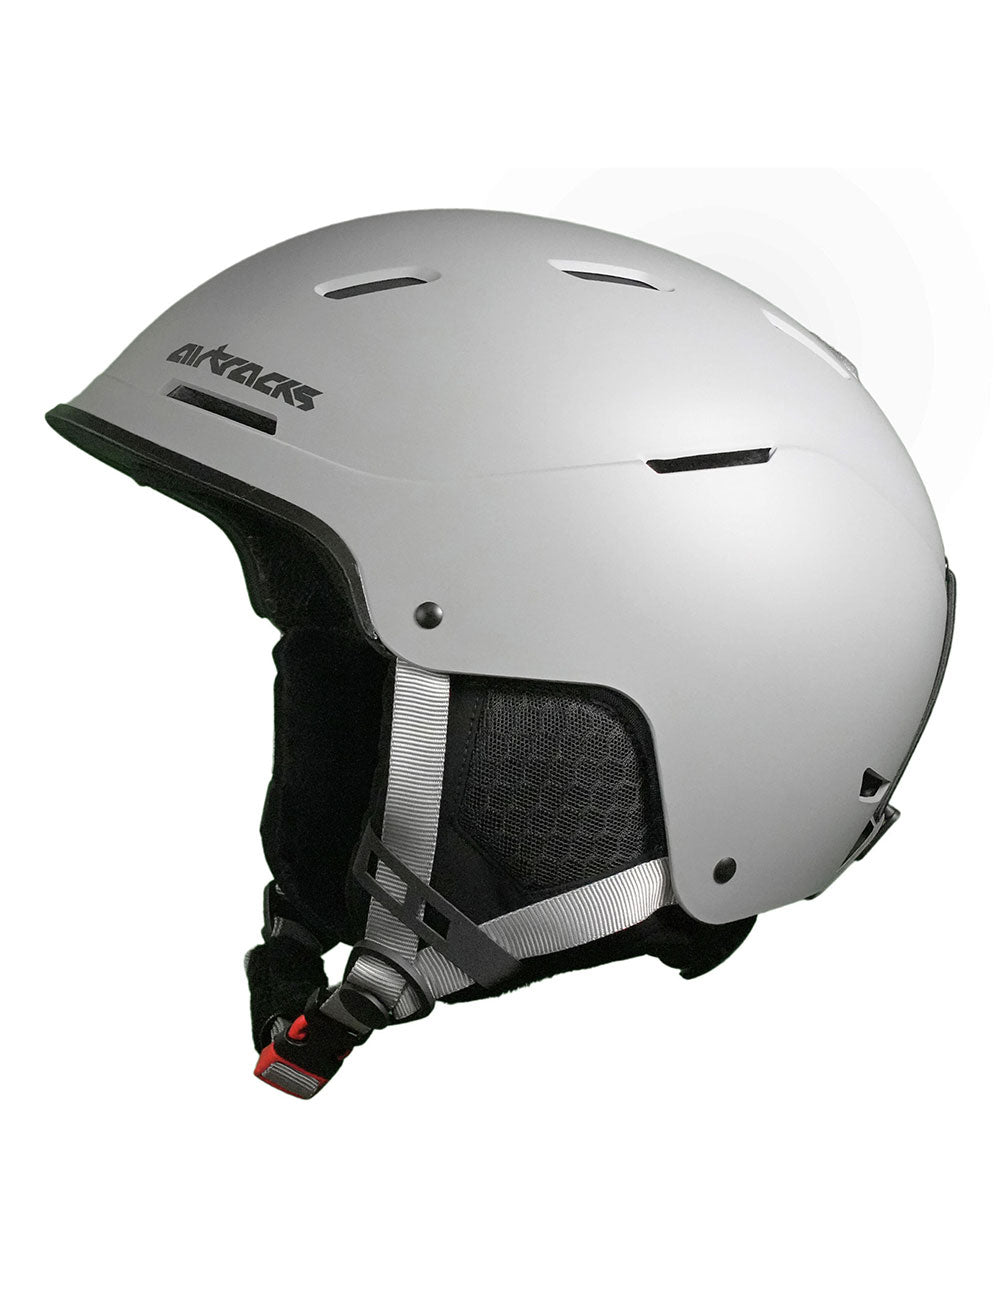 Strong_SB_Helm_sps2103_1300_1